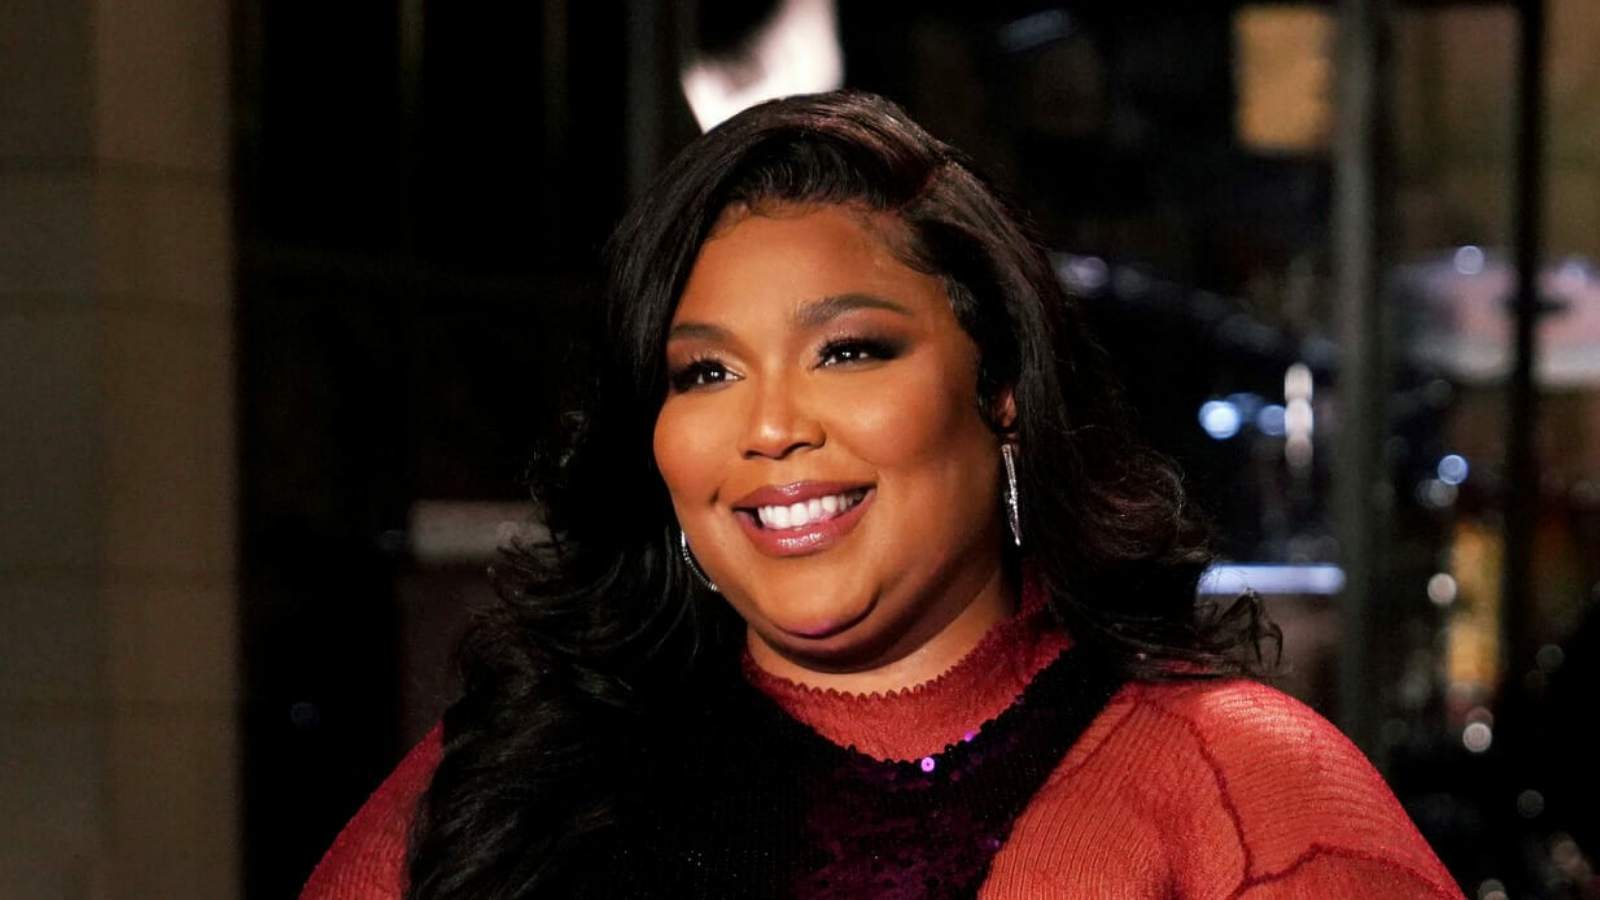 Lizzo Supported women’s right to abortion and asked for action& loud voices